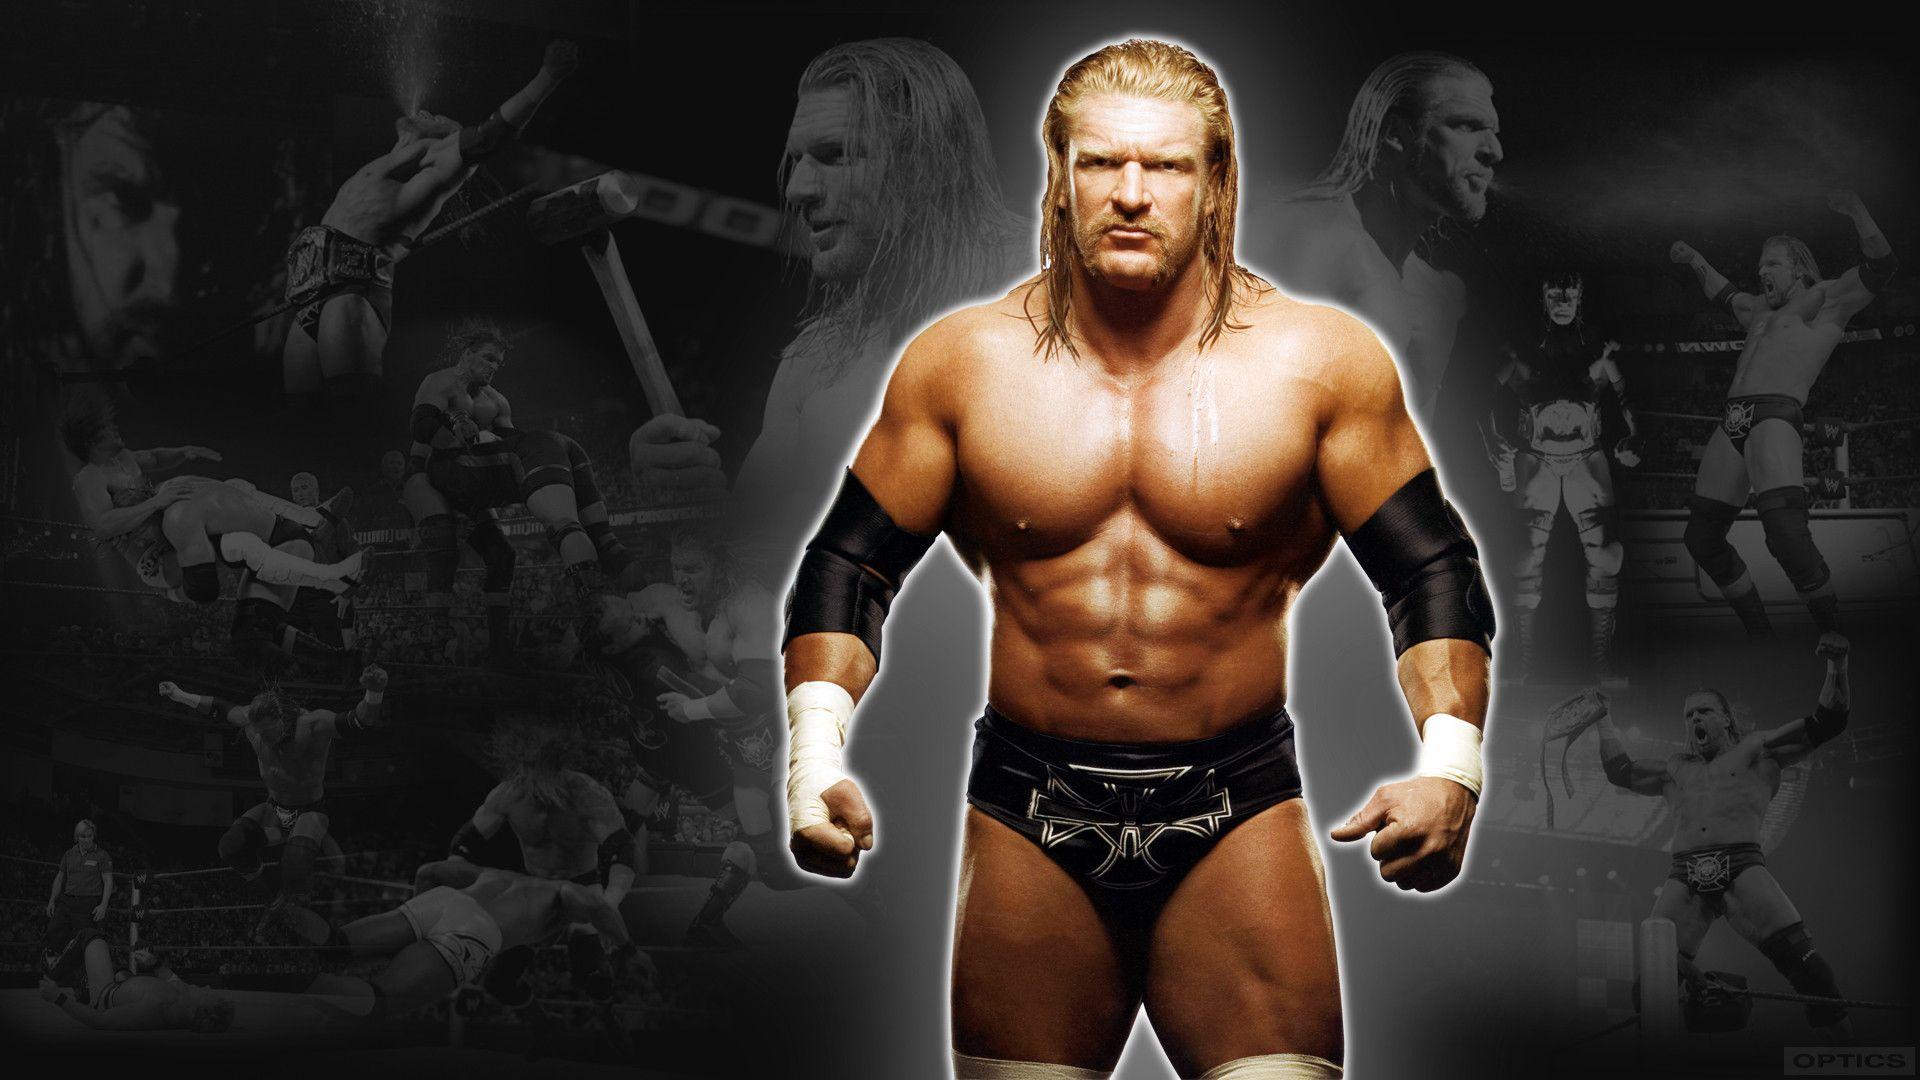 Wwe Hhh Photo 3074 HD Desktop Background and Widescreen